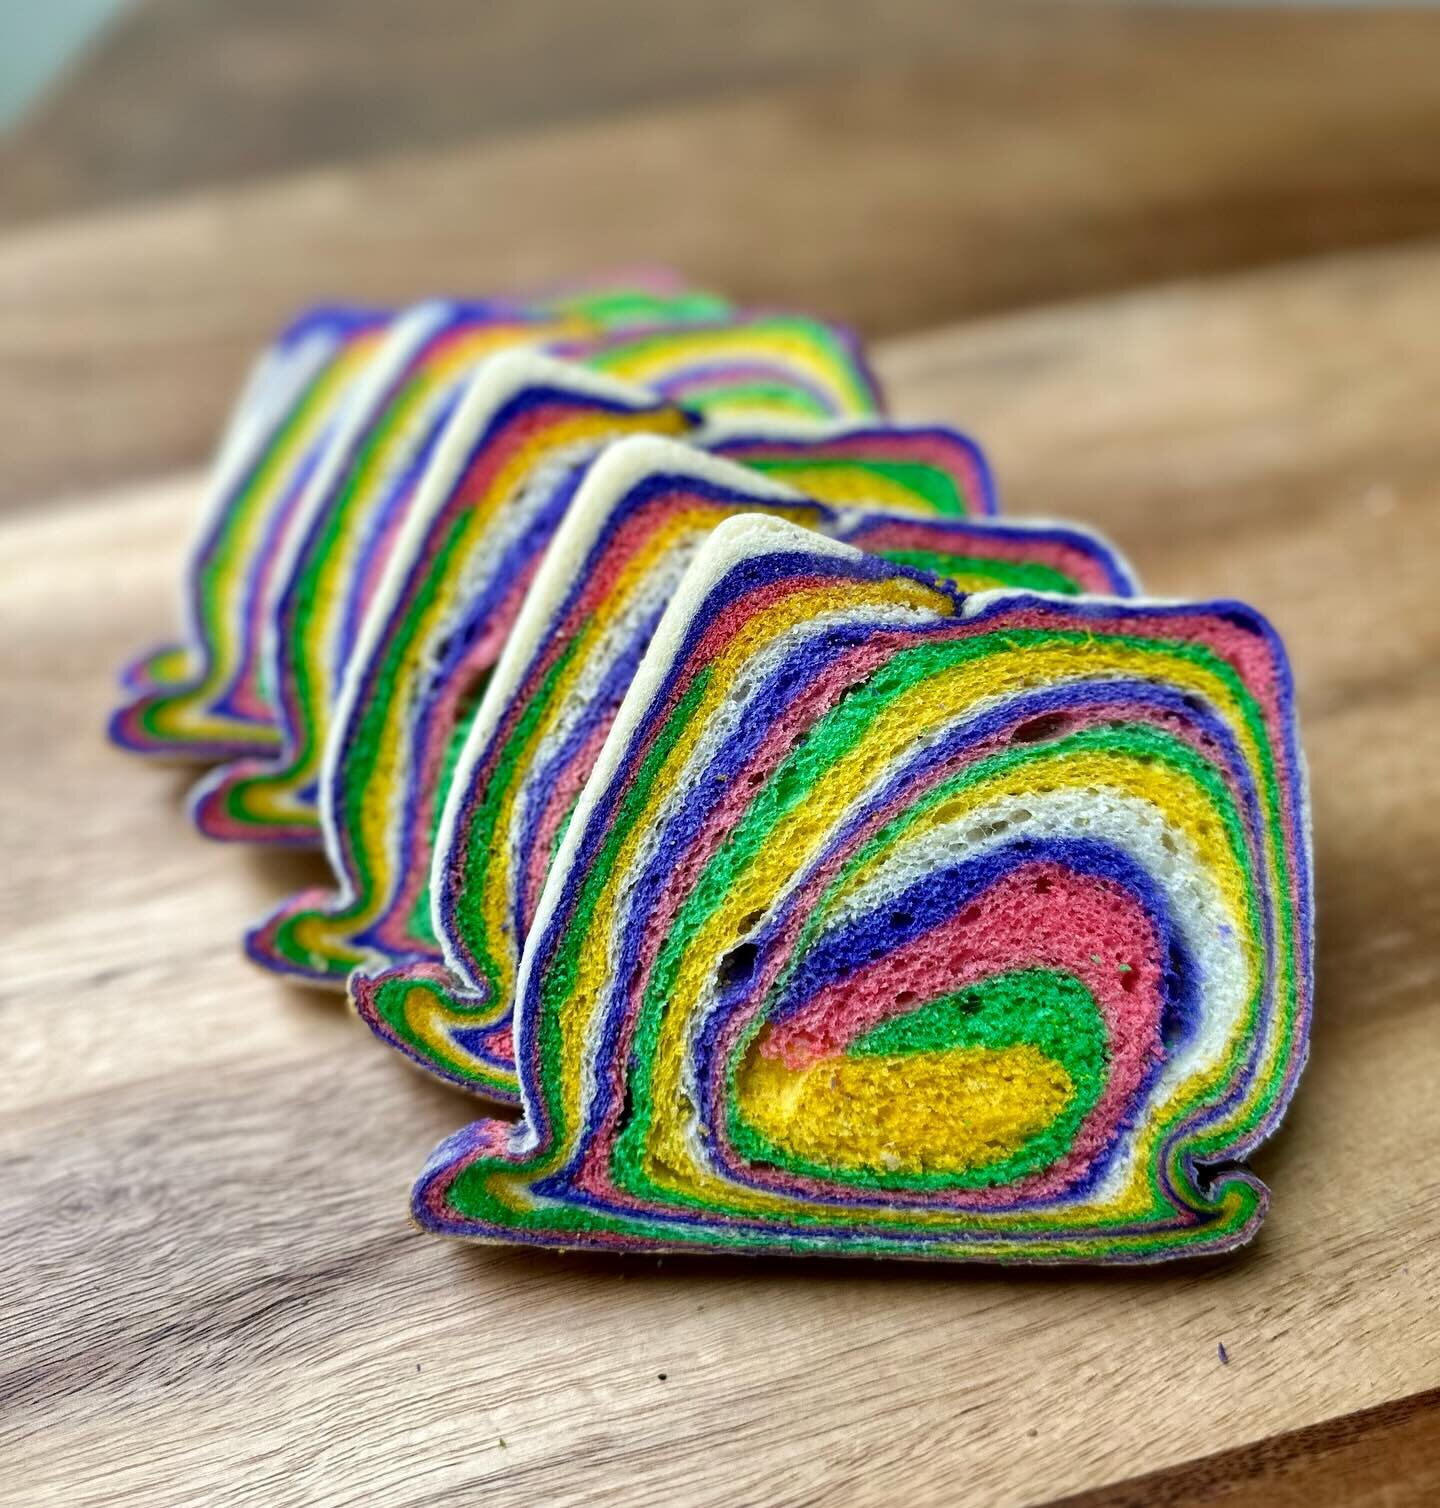 Slices of happiness! Rainbow Bread Loaf is here to add a pop of colour to your day 🌈 🍞 #goldilockscanada #kumainkanaba #color #rainbow